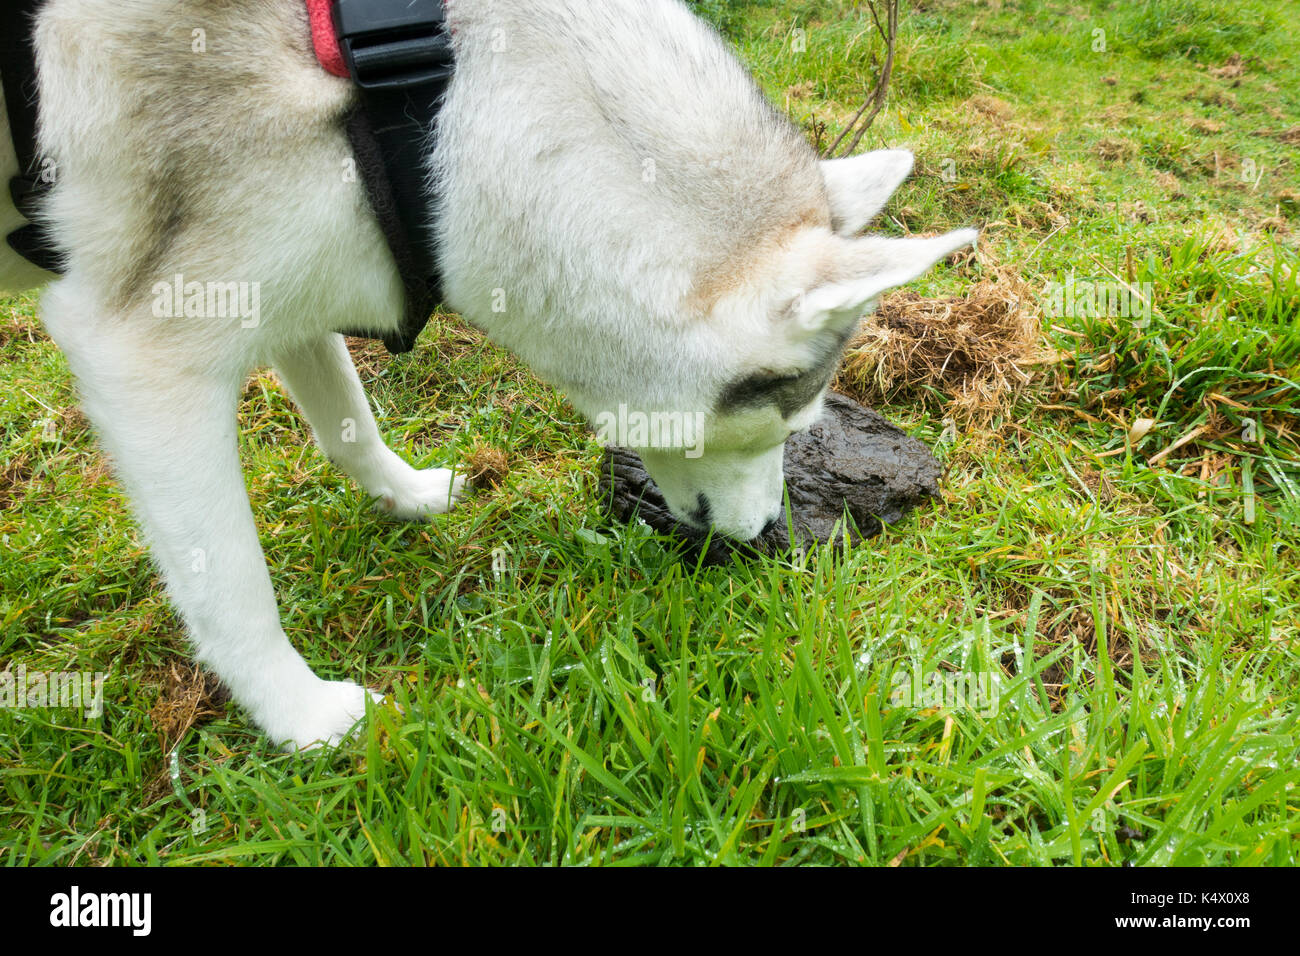 Husky Dog Eating And Licking Cow Or Horse Manure Or Cow Or Horse